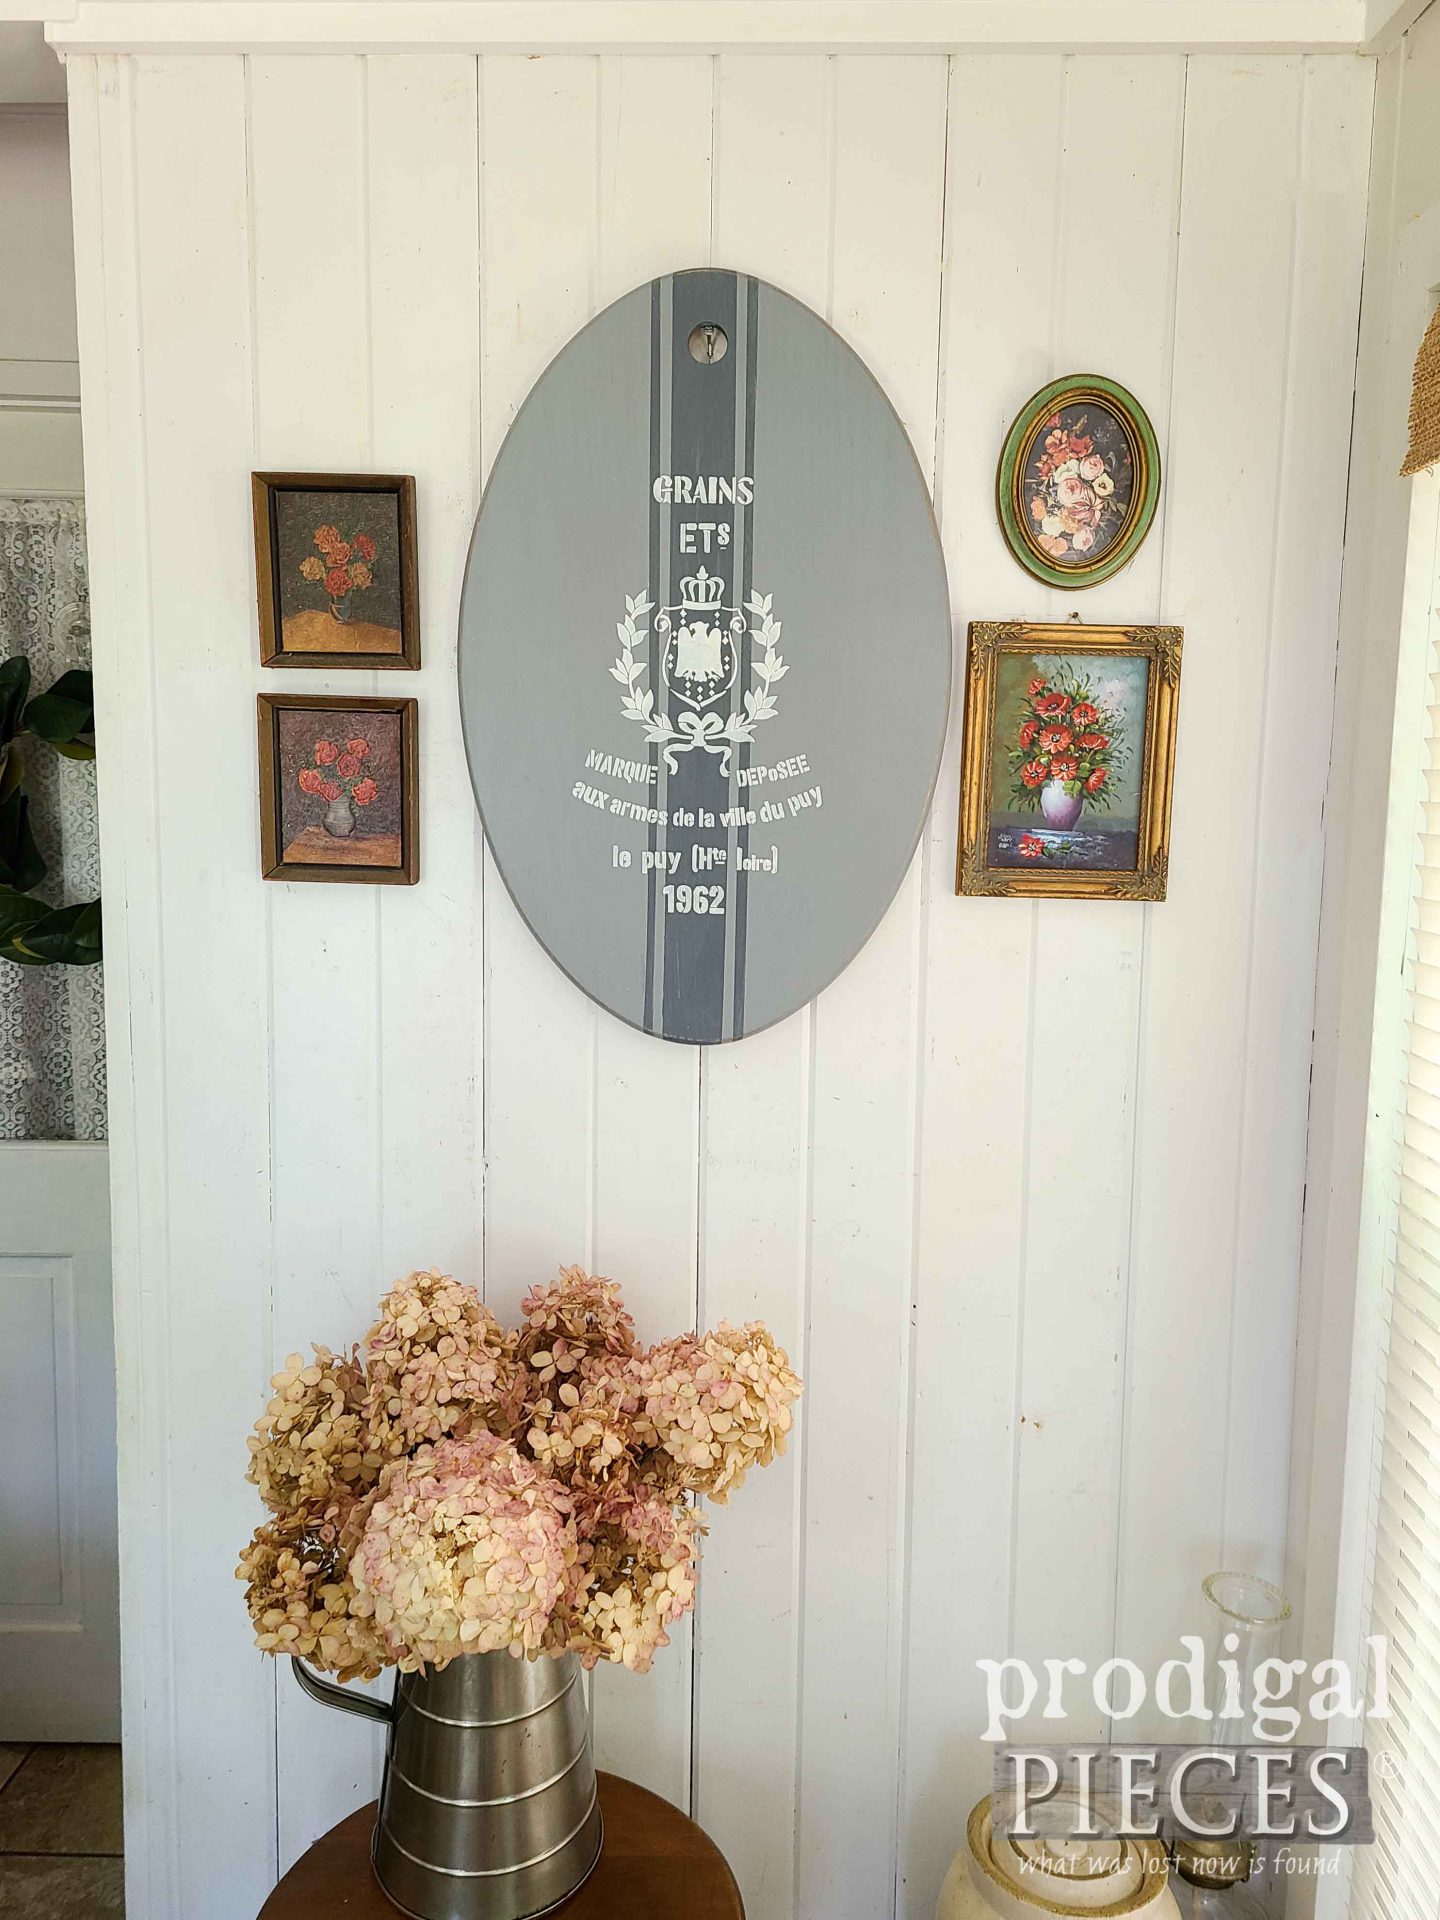 Handmade Wooden Farmhouse Serving Tray as Wall Decor from Side Table Upcycled by Larissa of Prodigal Pieces | prodigalpieces.com #prodigalpieces #homedecor #diy